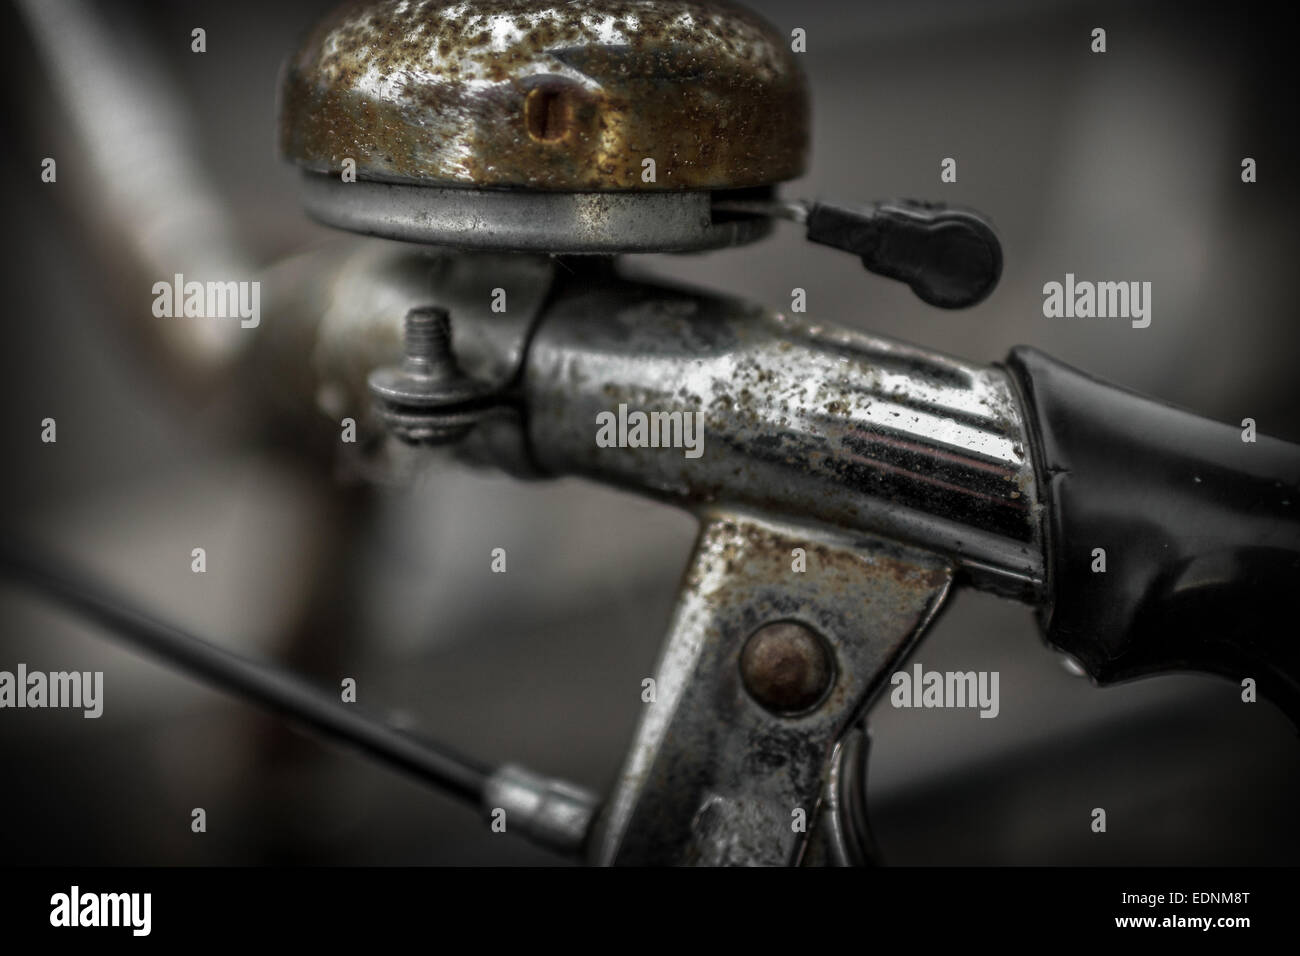 Details of a handlebar of bicycle attacked by rust. Stock Photo